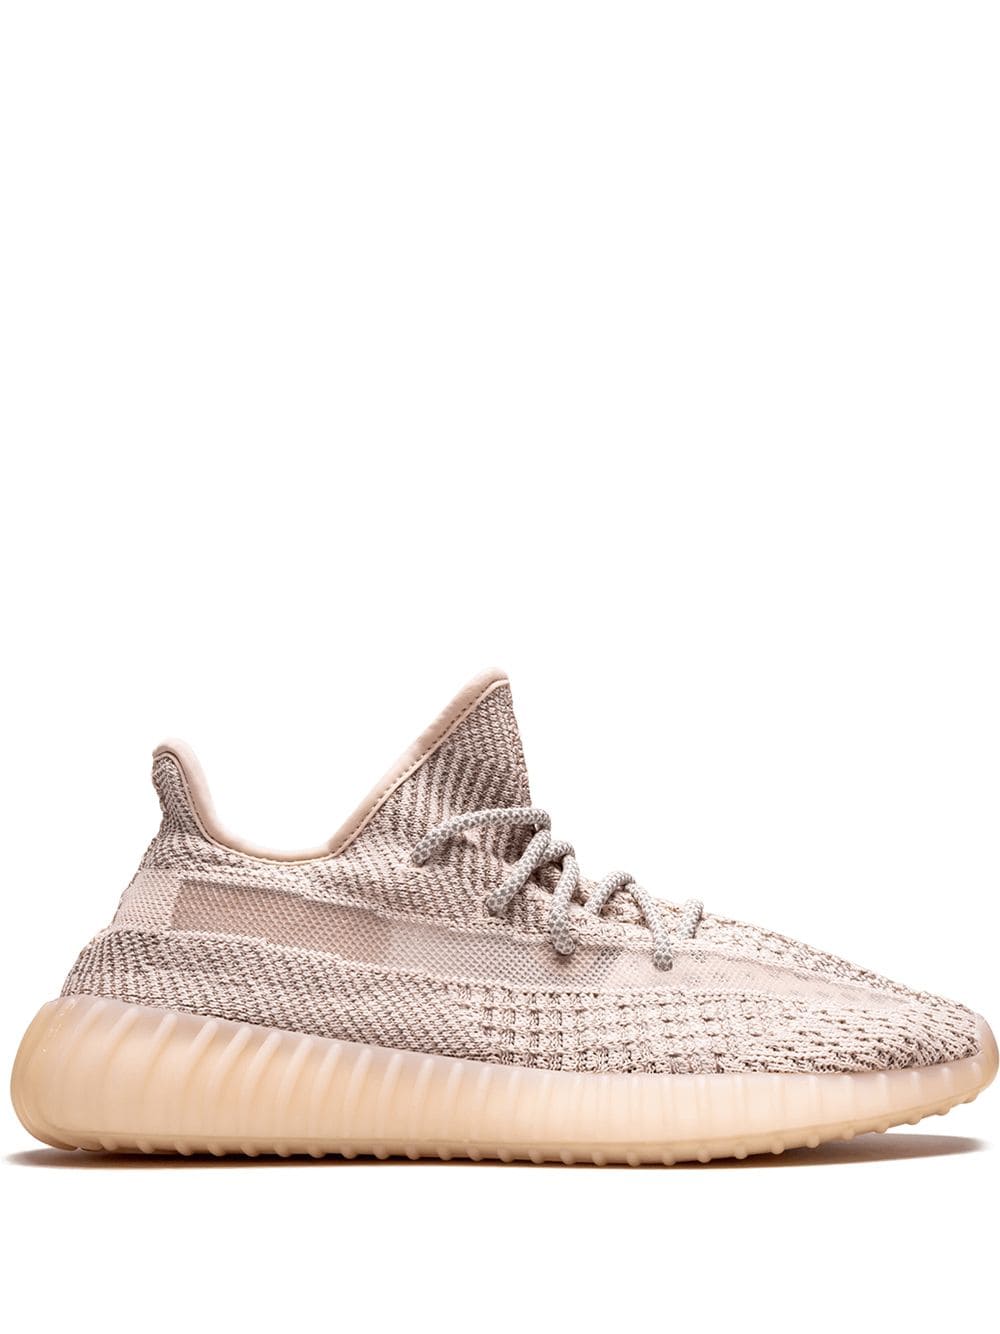 adidas Yeezy YEEZY Boost 350 V2 "Synth Reflective" sneakers - Neutrals von adidas Yeezy